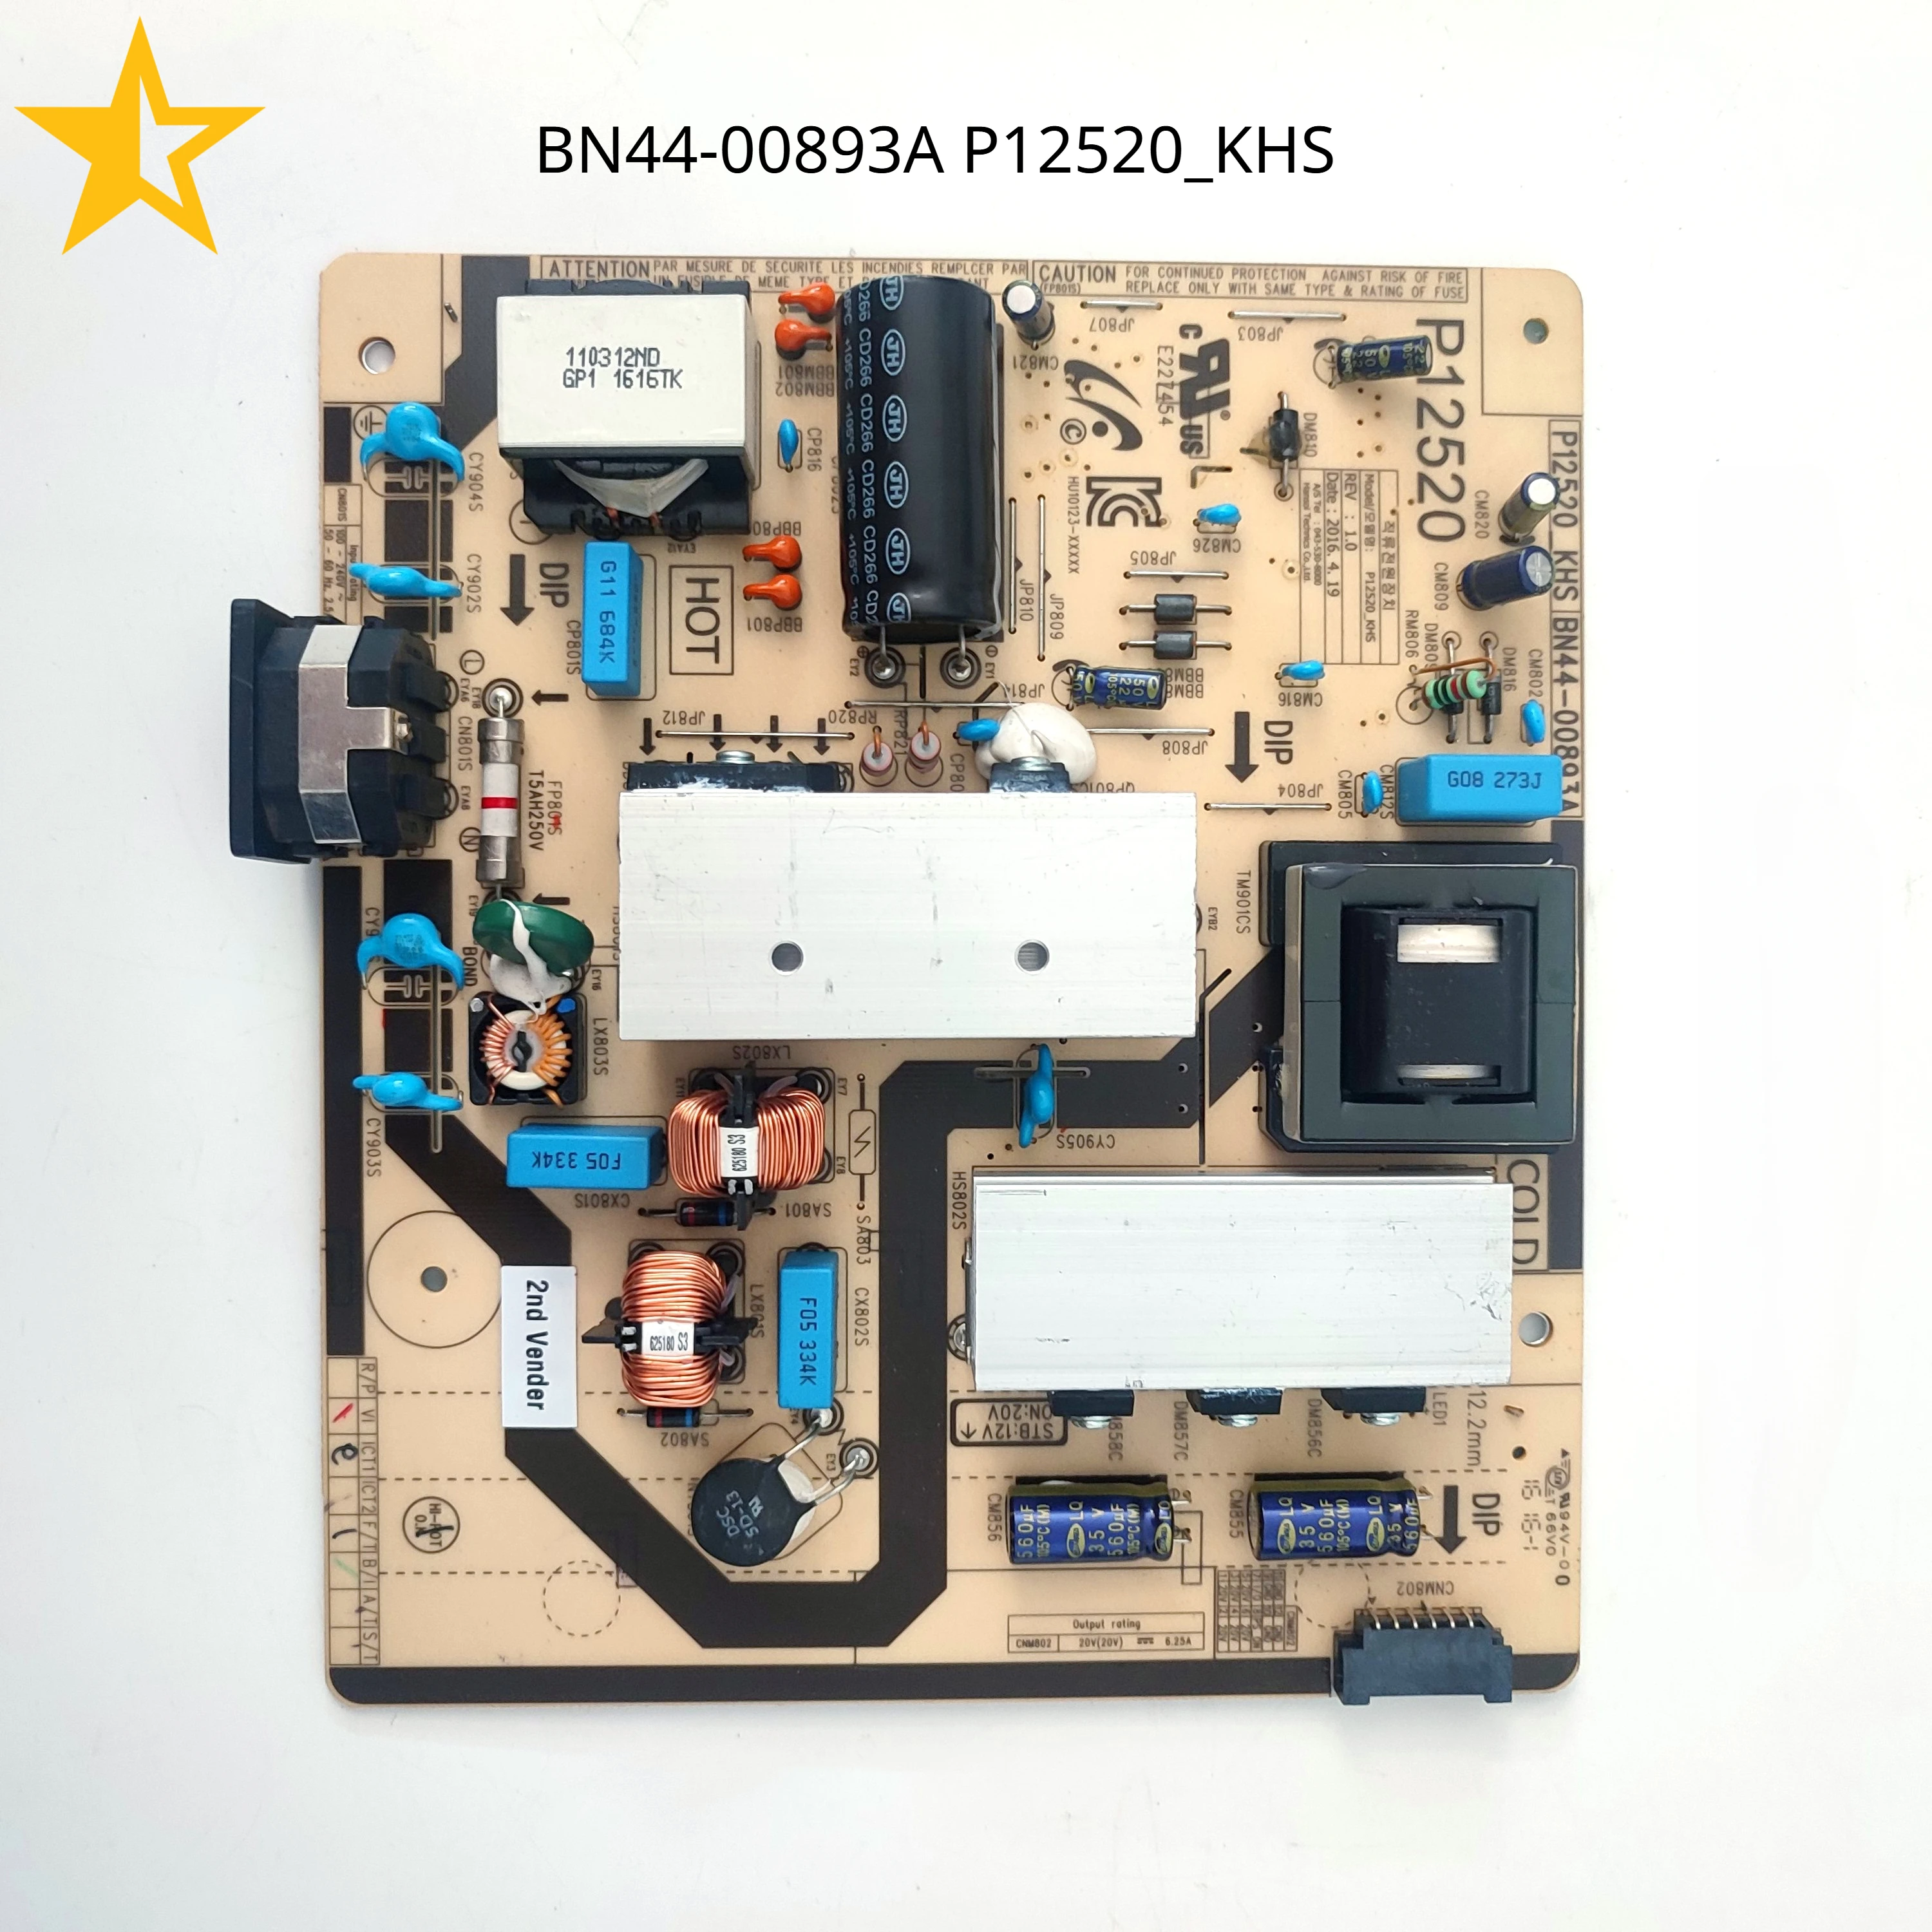 

Genuine Power Supply Board BN44-00893A P12520_KHS is for LC34H892WGE LC34H890WGU LC34H890WGN TV Parts